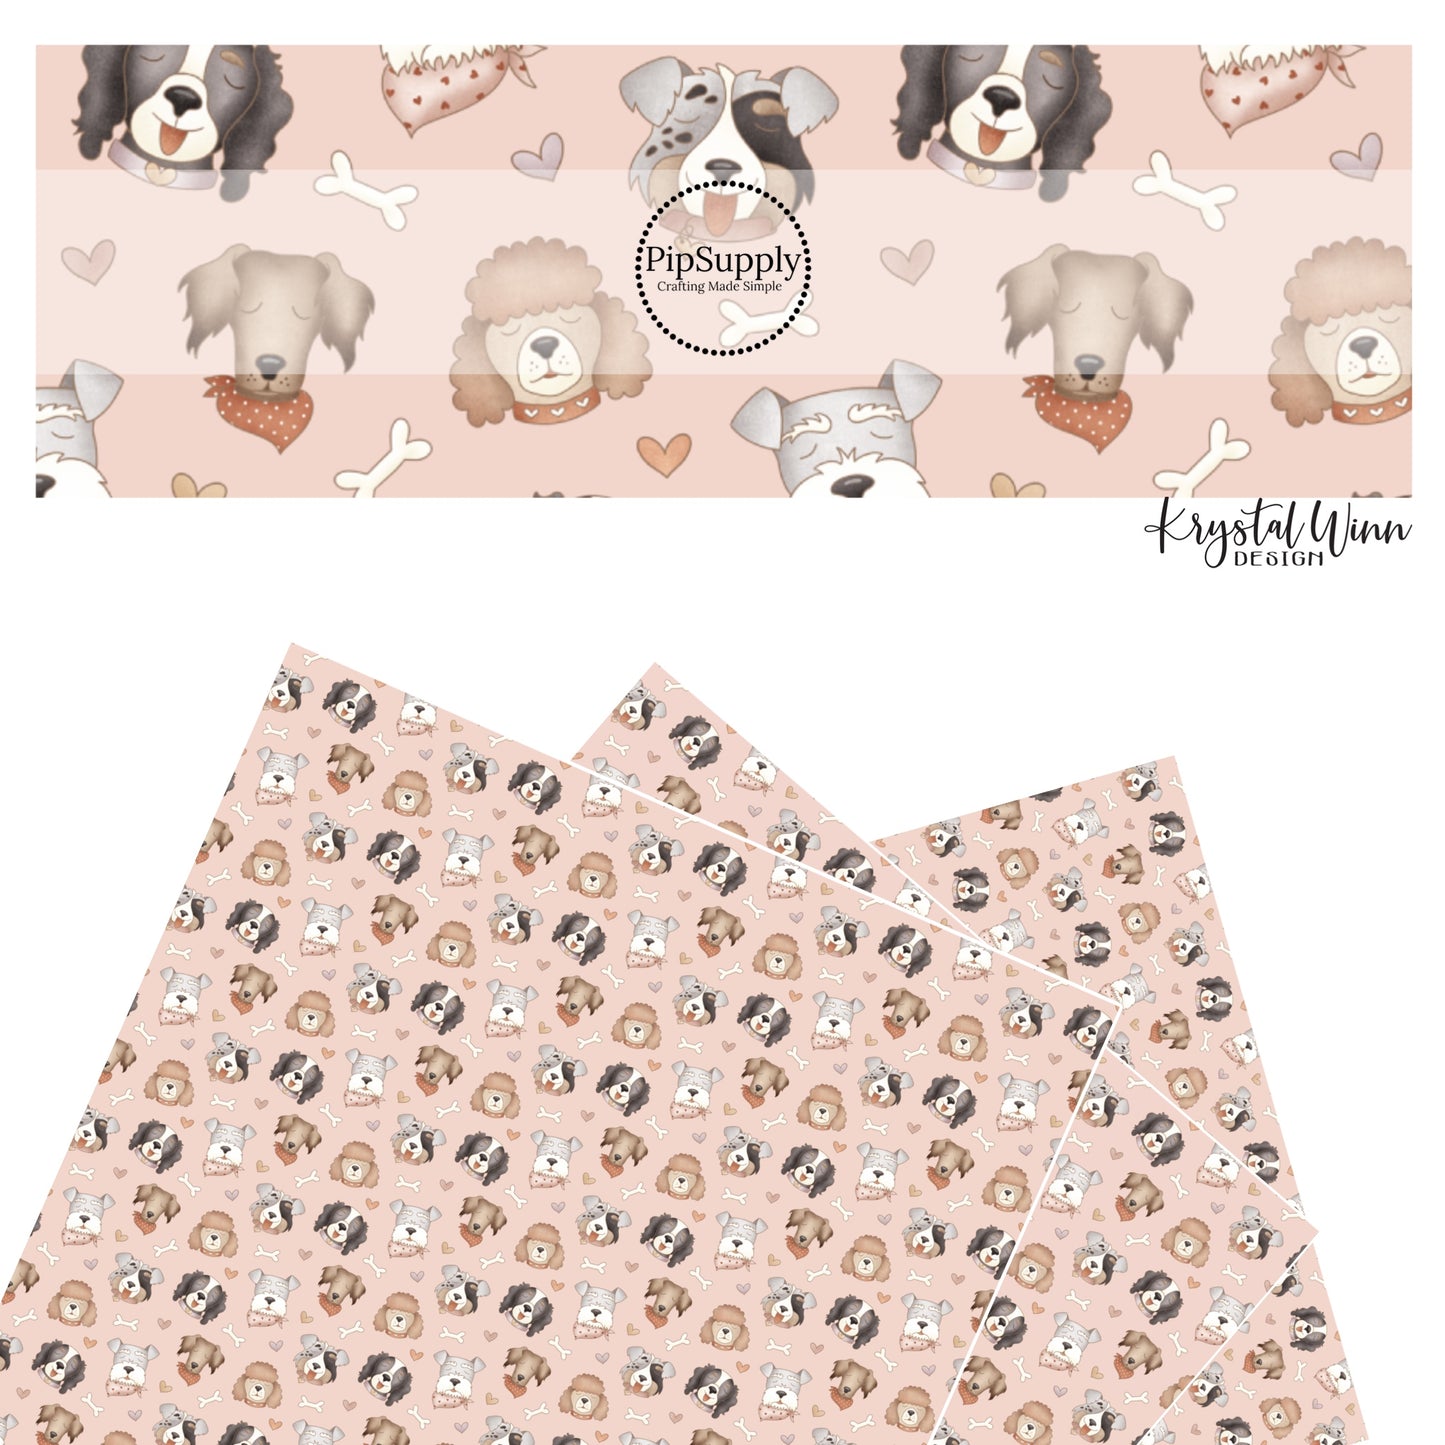 Puppy faces with hearts and bones on pink faux leather sheets